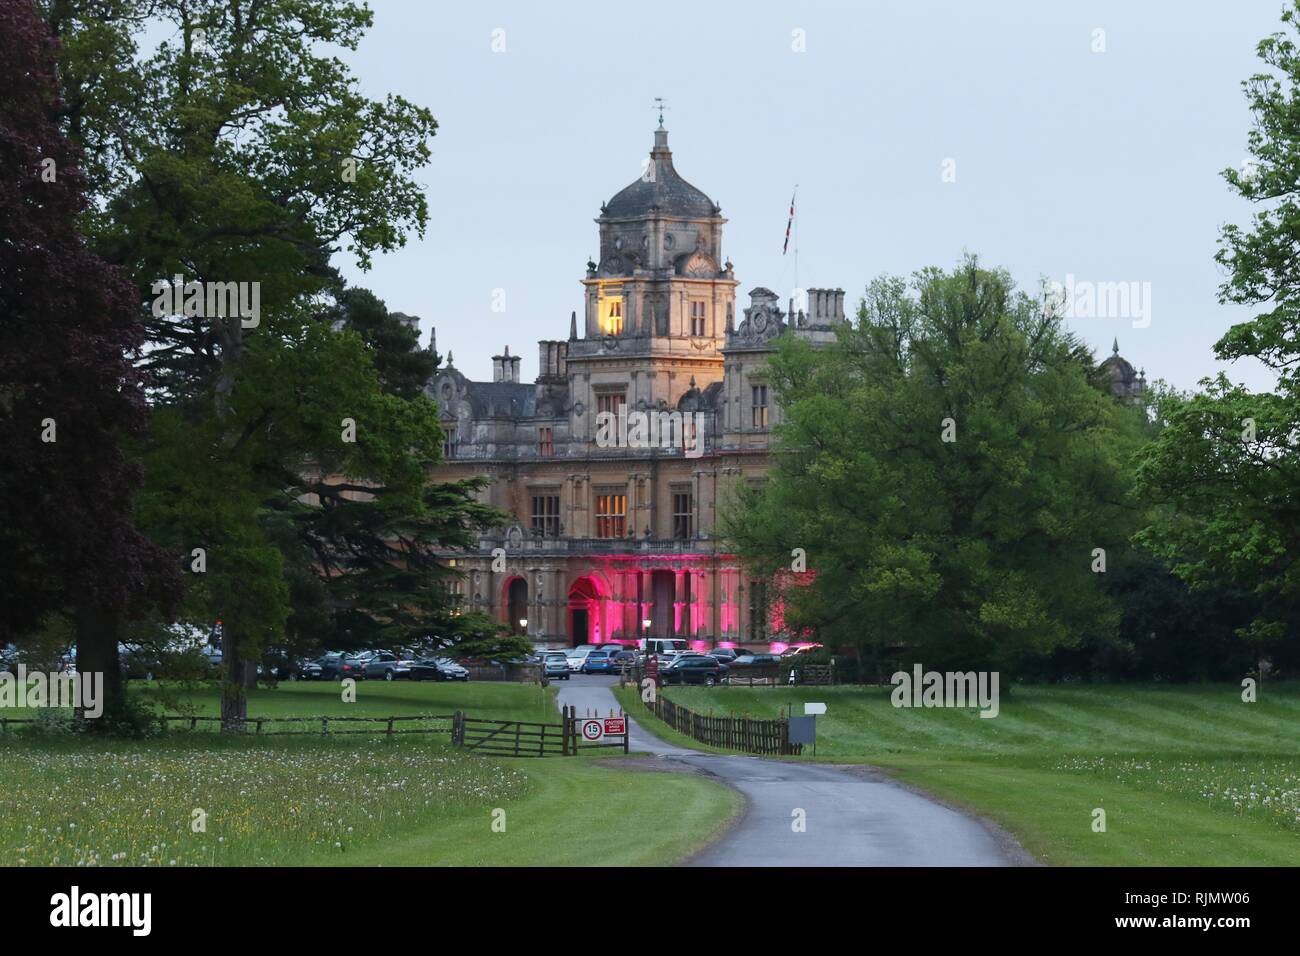 Westonbirt School, an co-educational independent day and boarding school for boys and girls aged 11 to 18 located near Tetbury in Gloucestershire, UK. Stock Photo